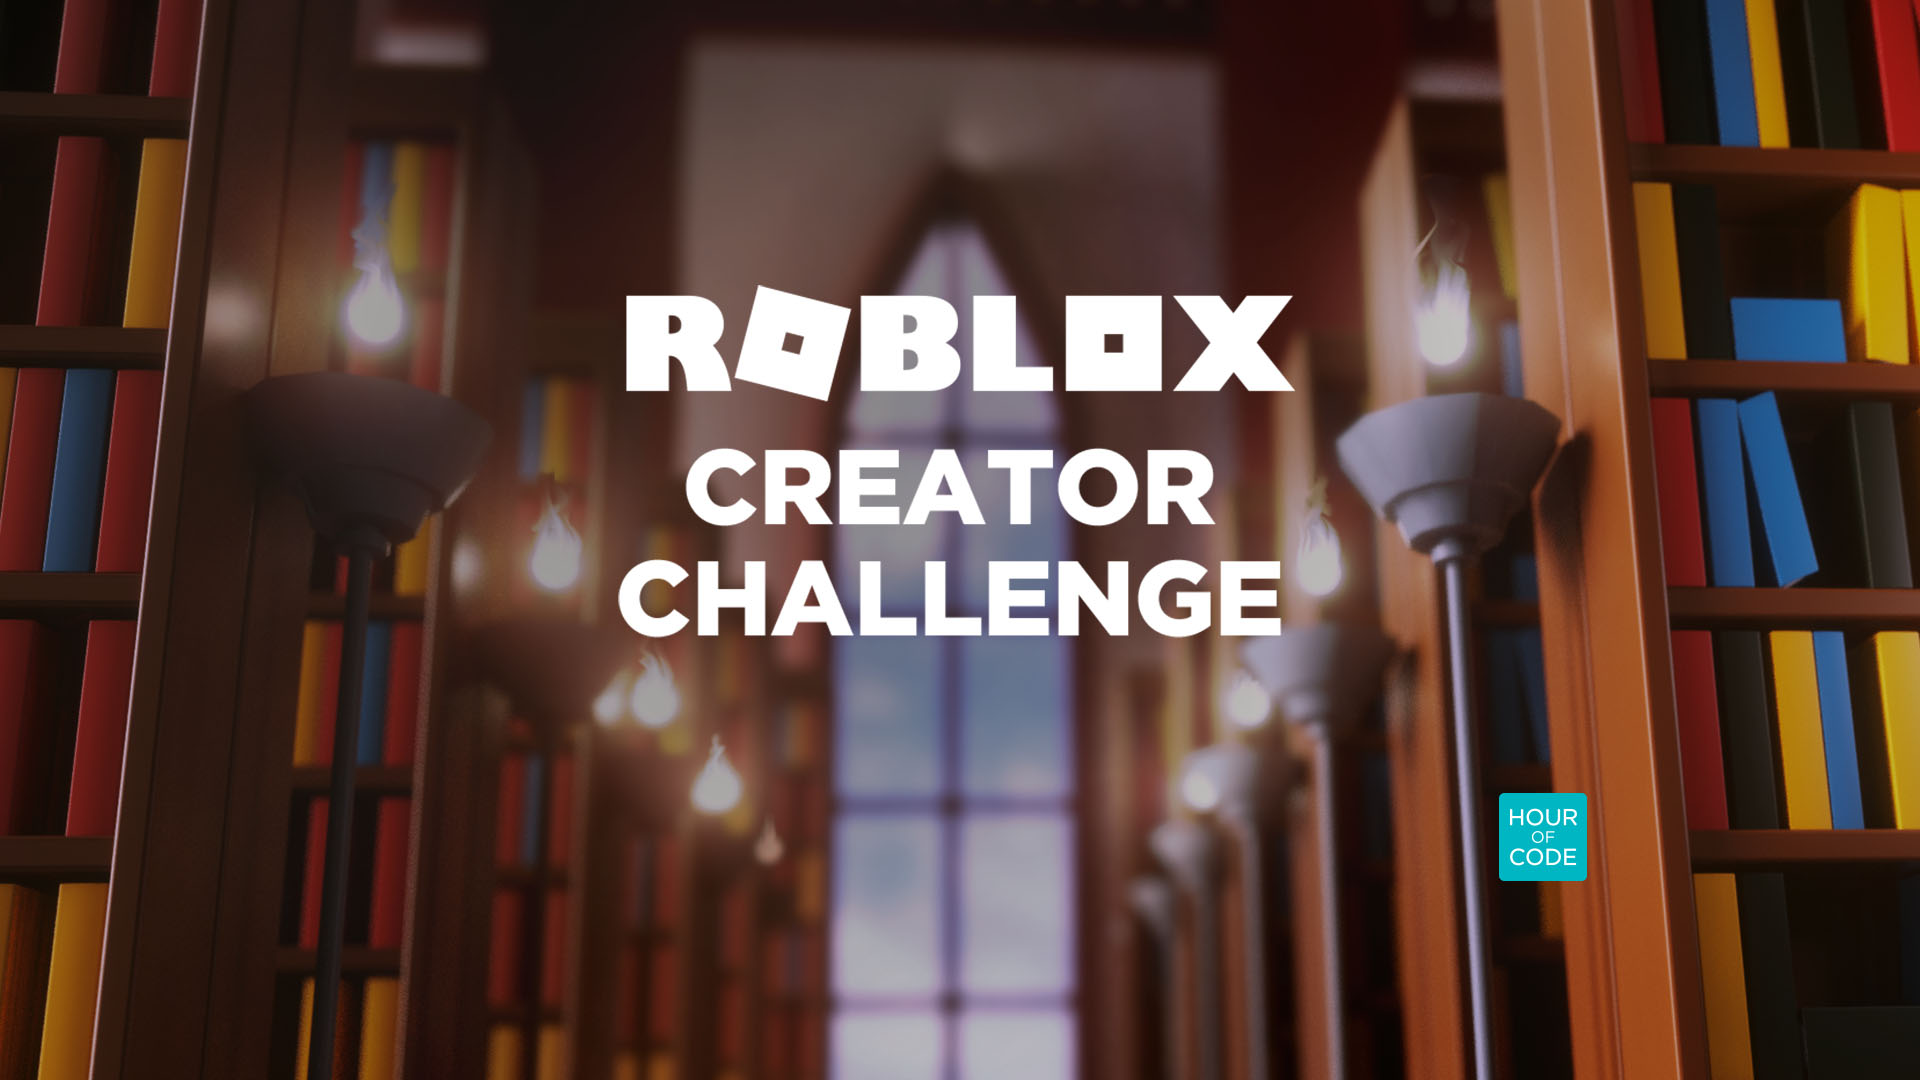 What Does The Roblox Creator Look Like